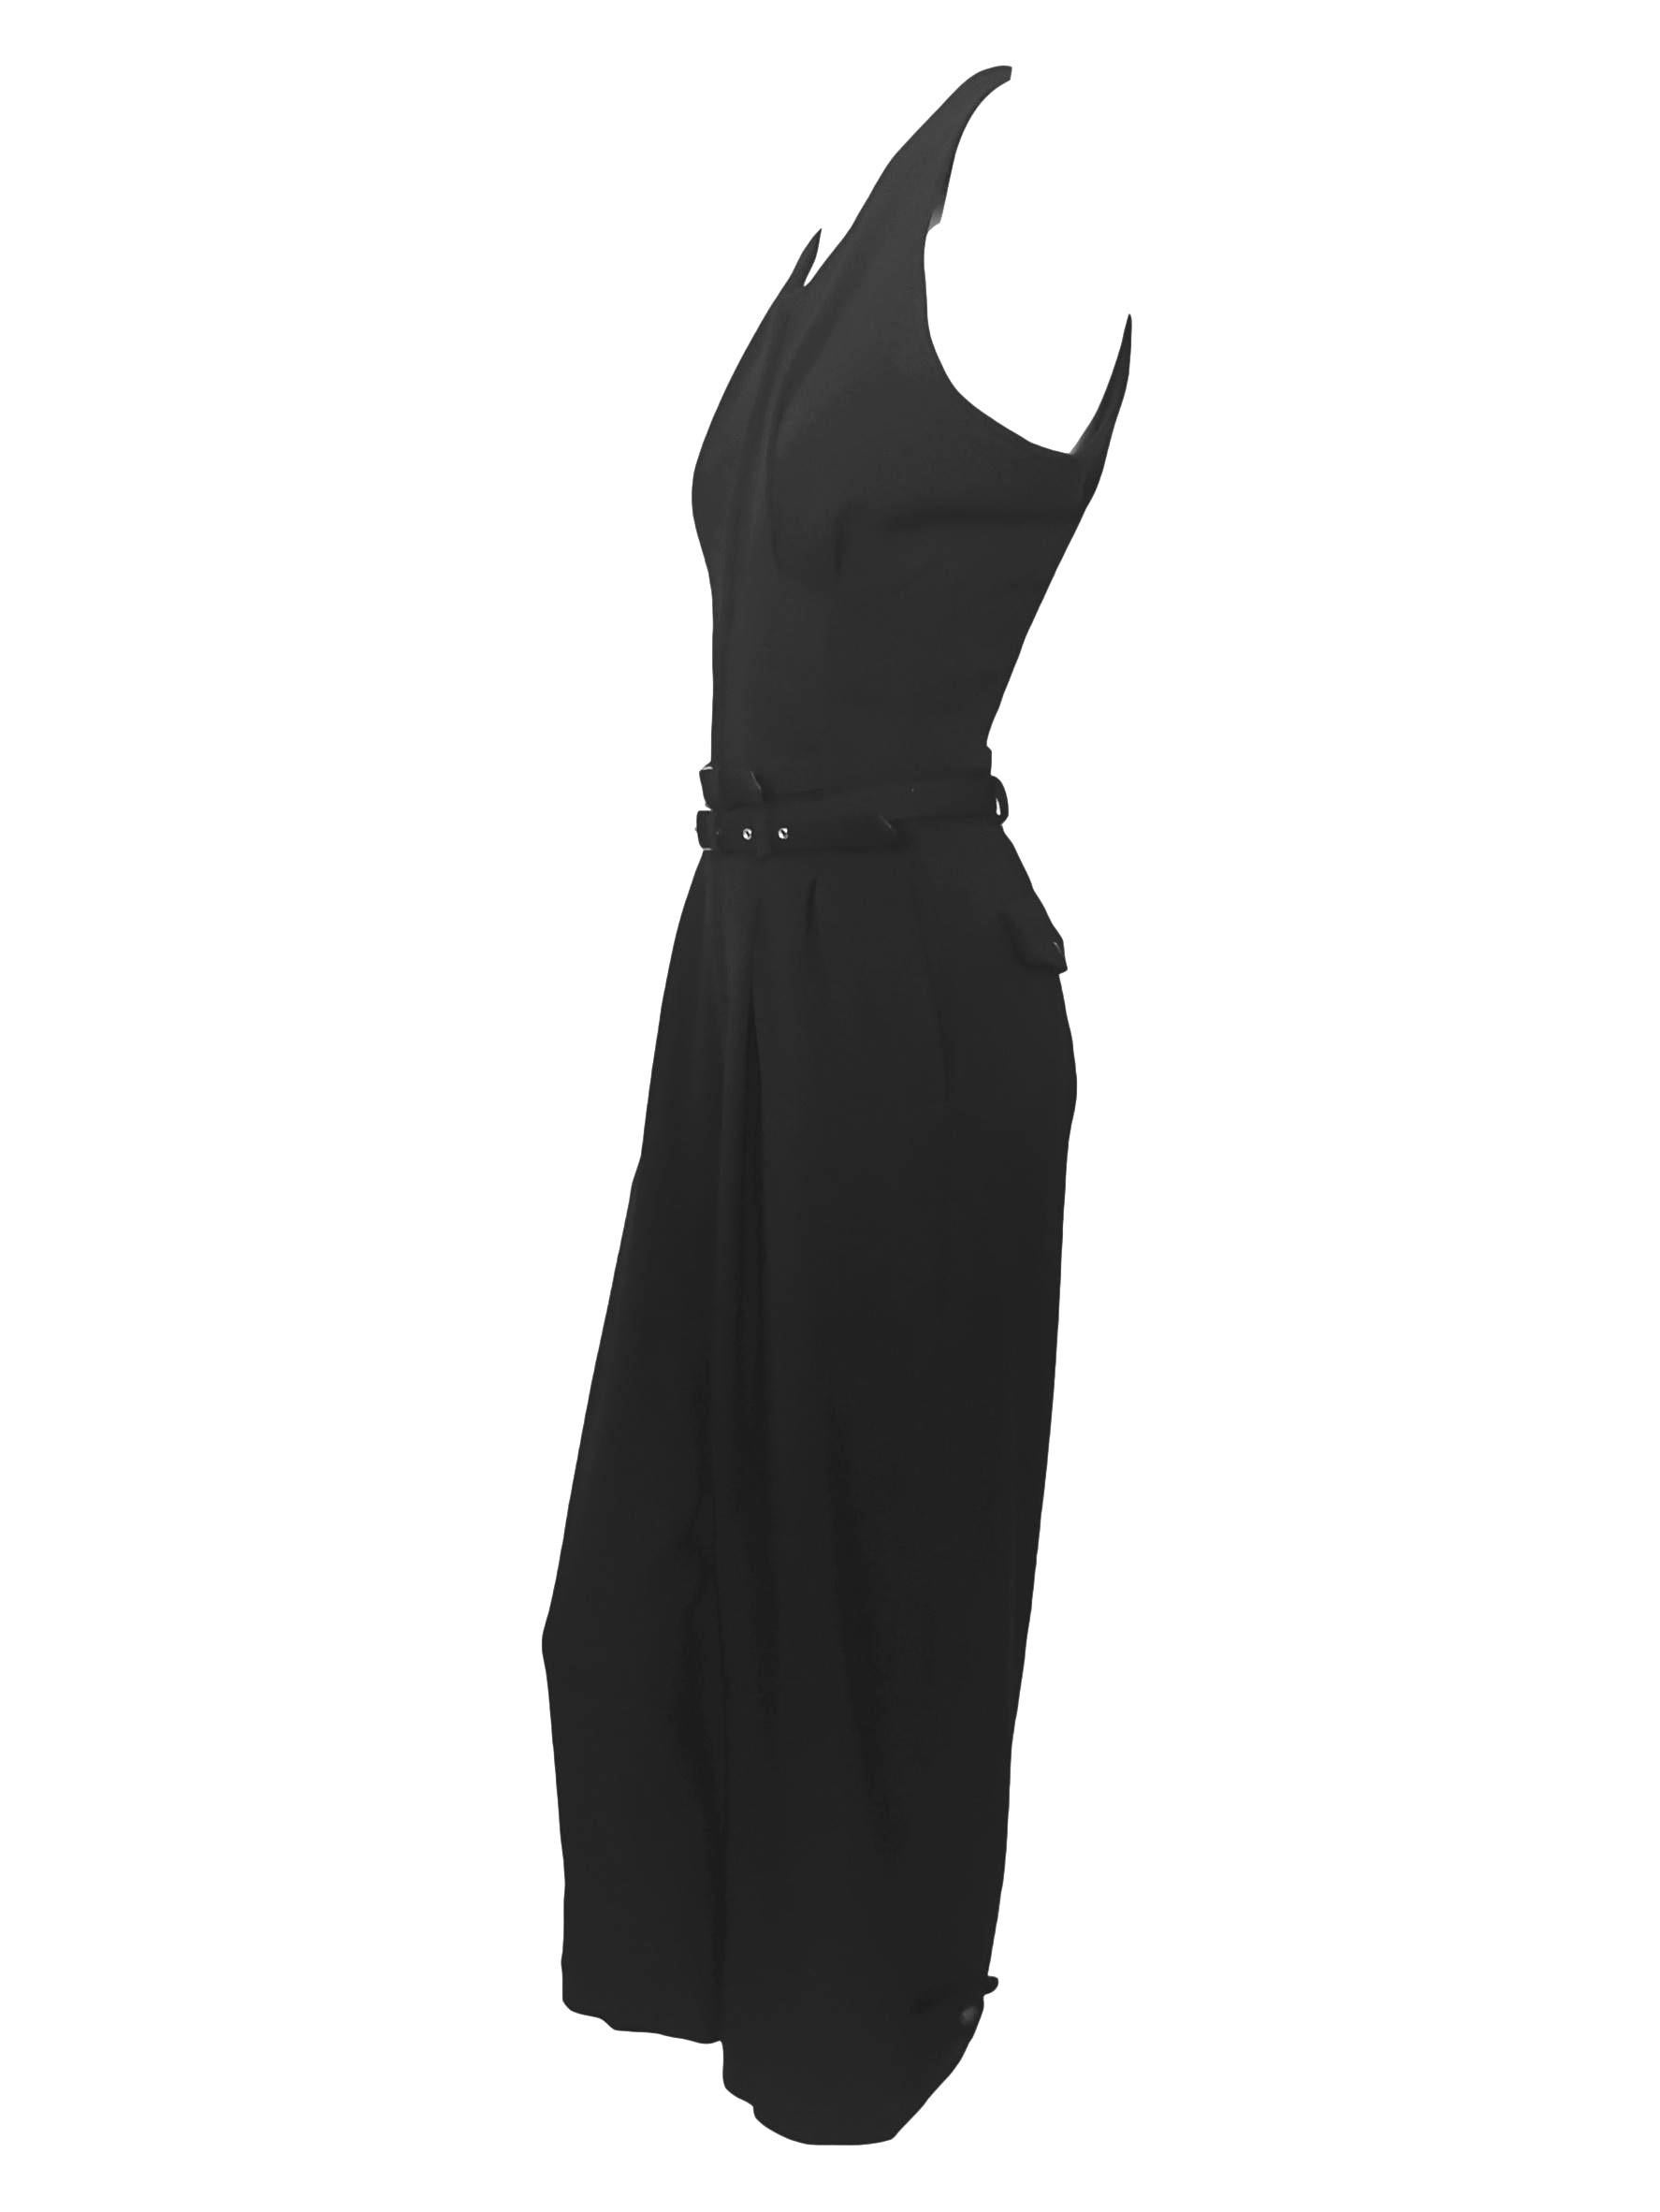 Comme des Garcons Wool Double Belted Jumpsuit AD 1989 For Sale 3